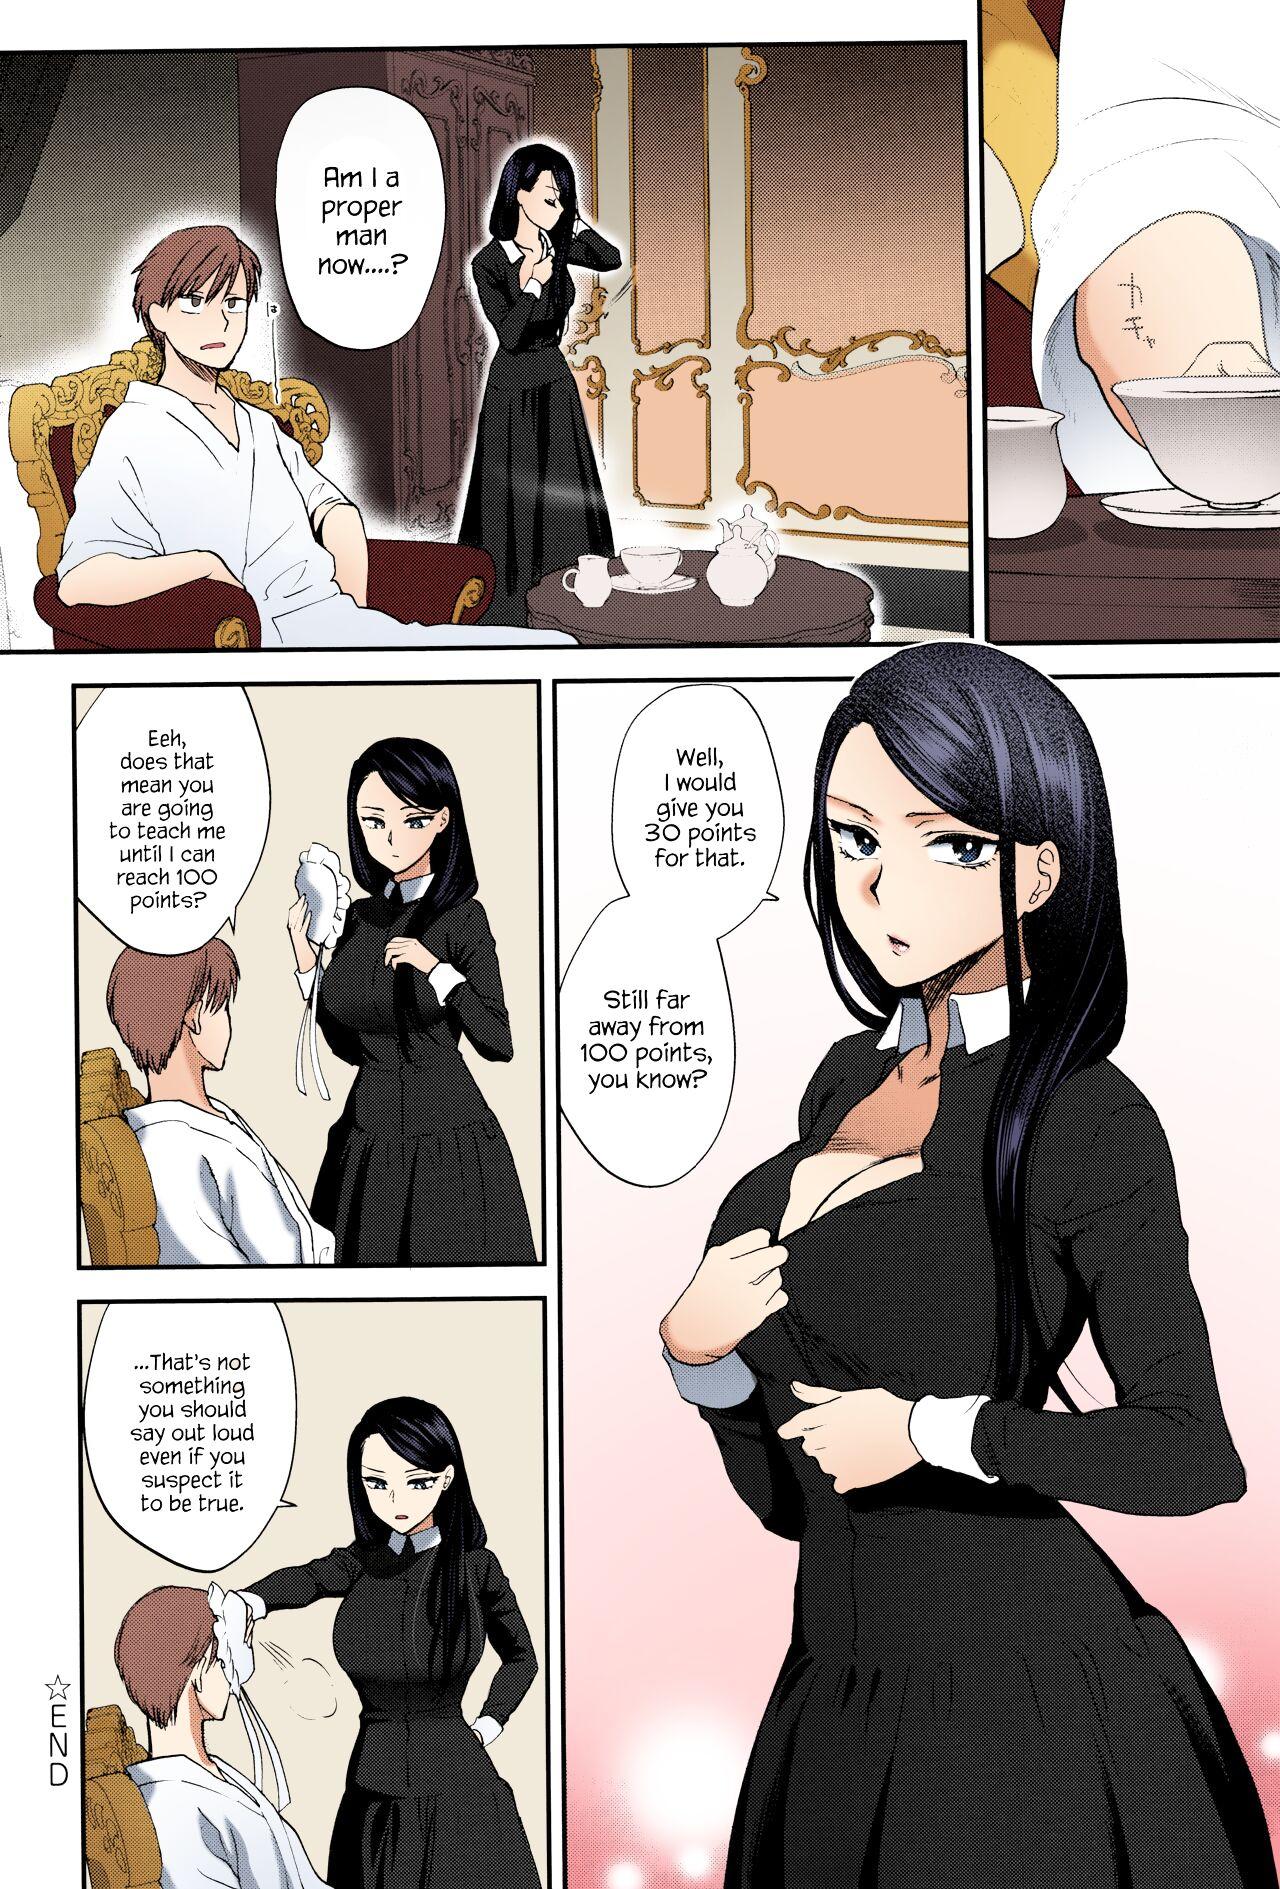 Kyoudou Well Maid - The Well “Maid” Instructor 23